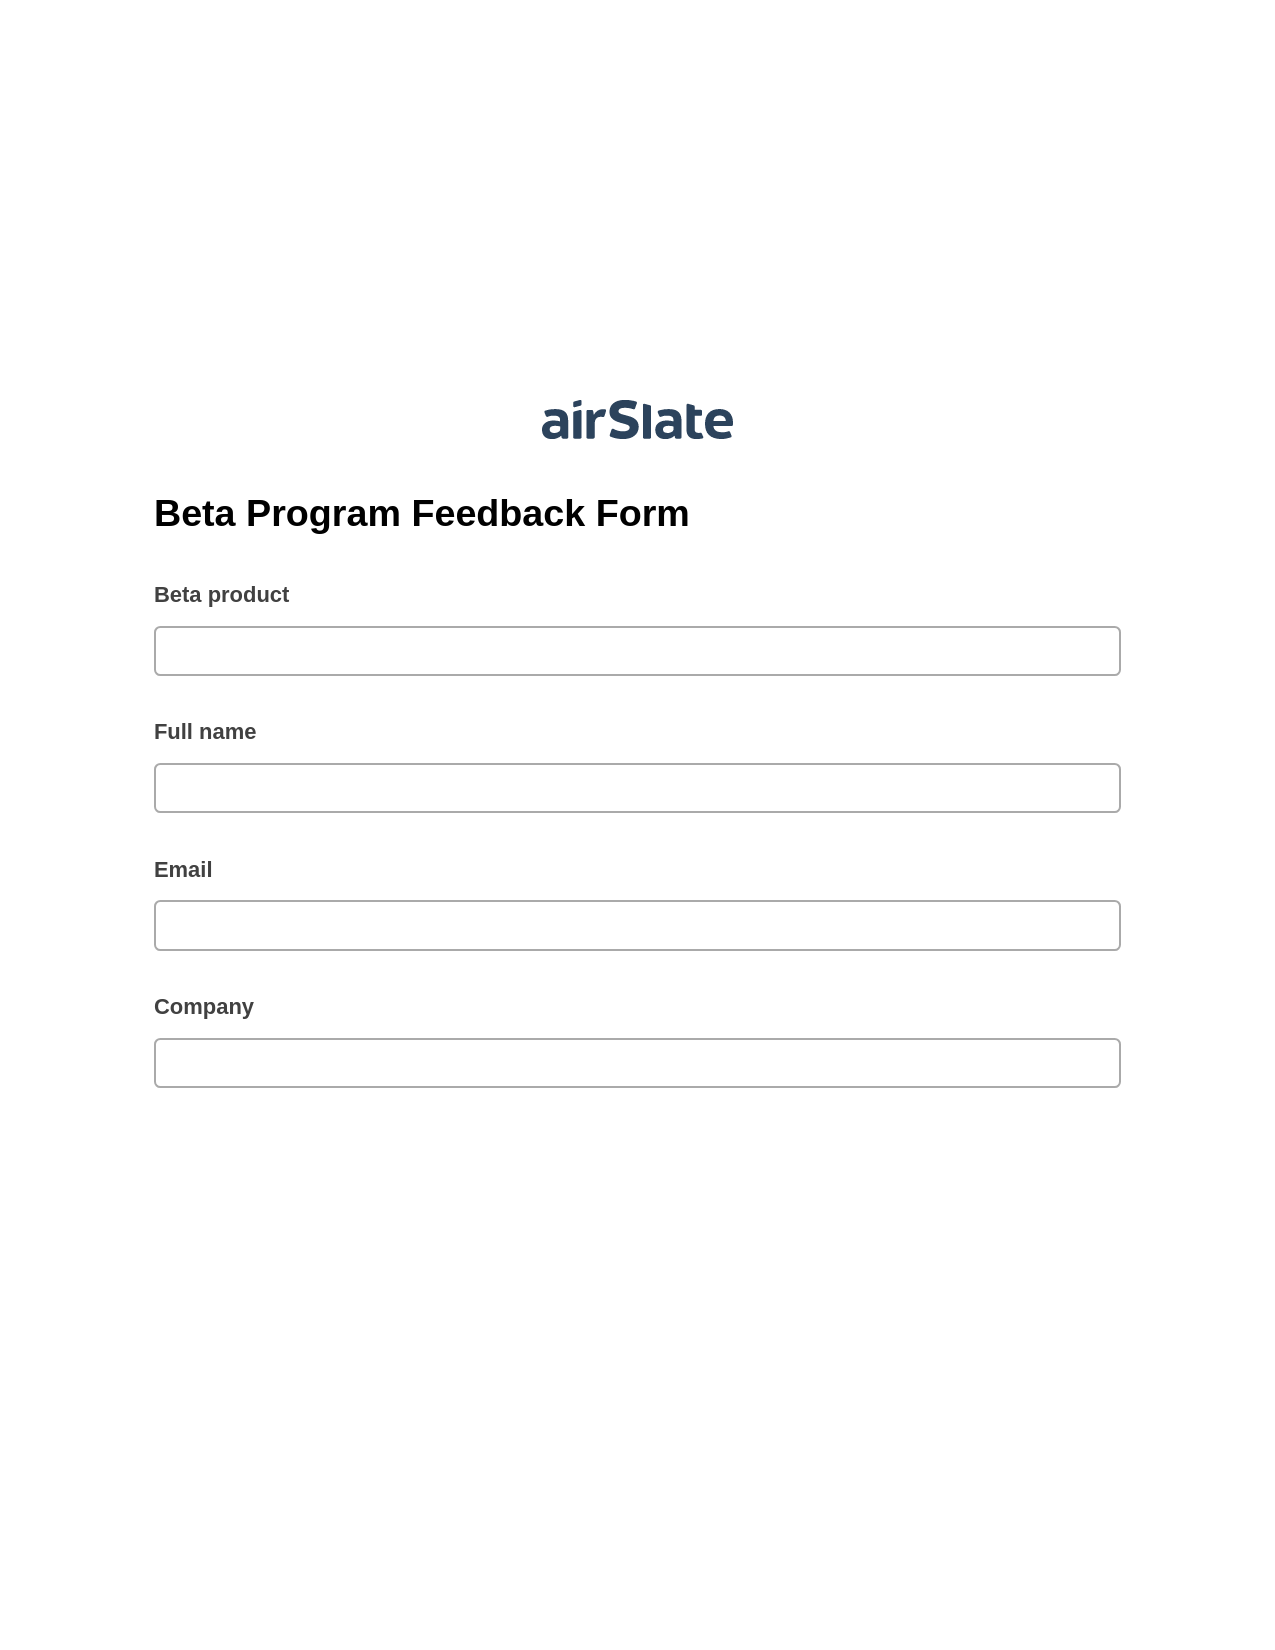 Beta Program Feedback Form Pre-fill from Google Sheets Bot, Roles Reminder Bot, Export to Excel 365 Bot